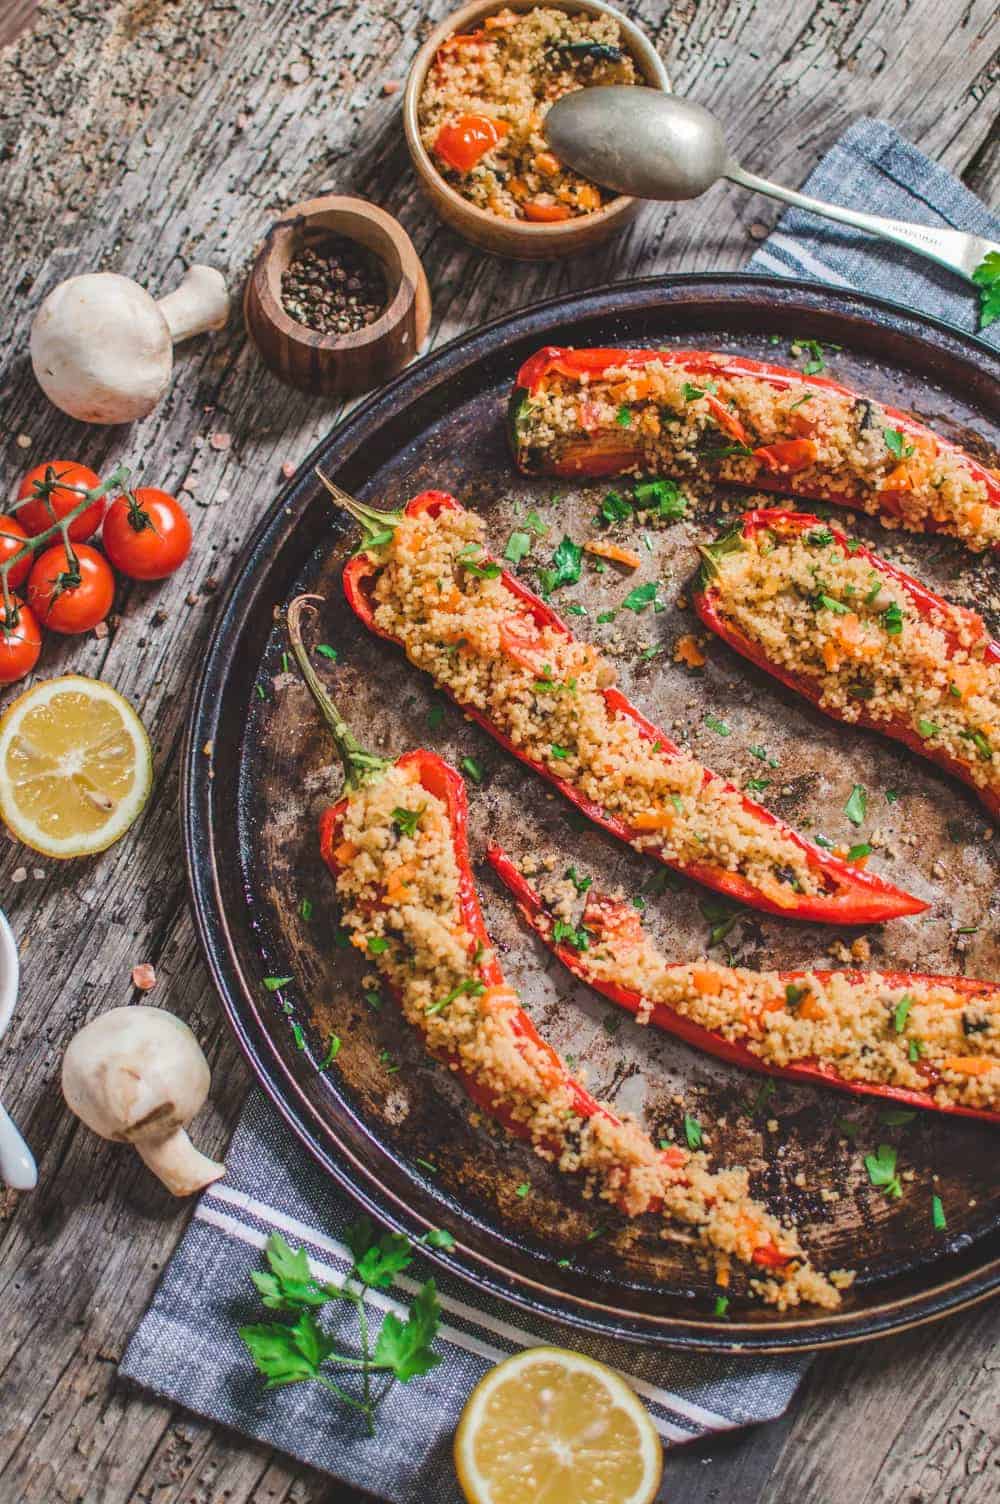 red romano bell peppers stuffed with couscous on a tray surrounded by lemon, garlic, and tomatoes